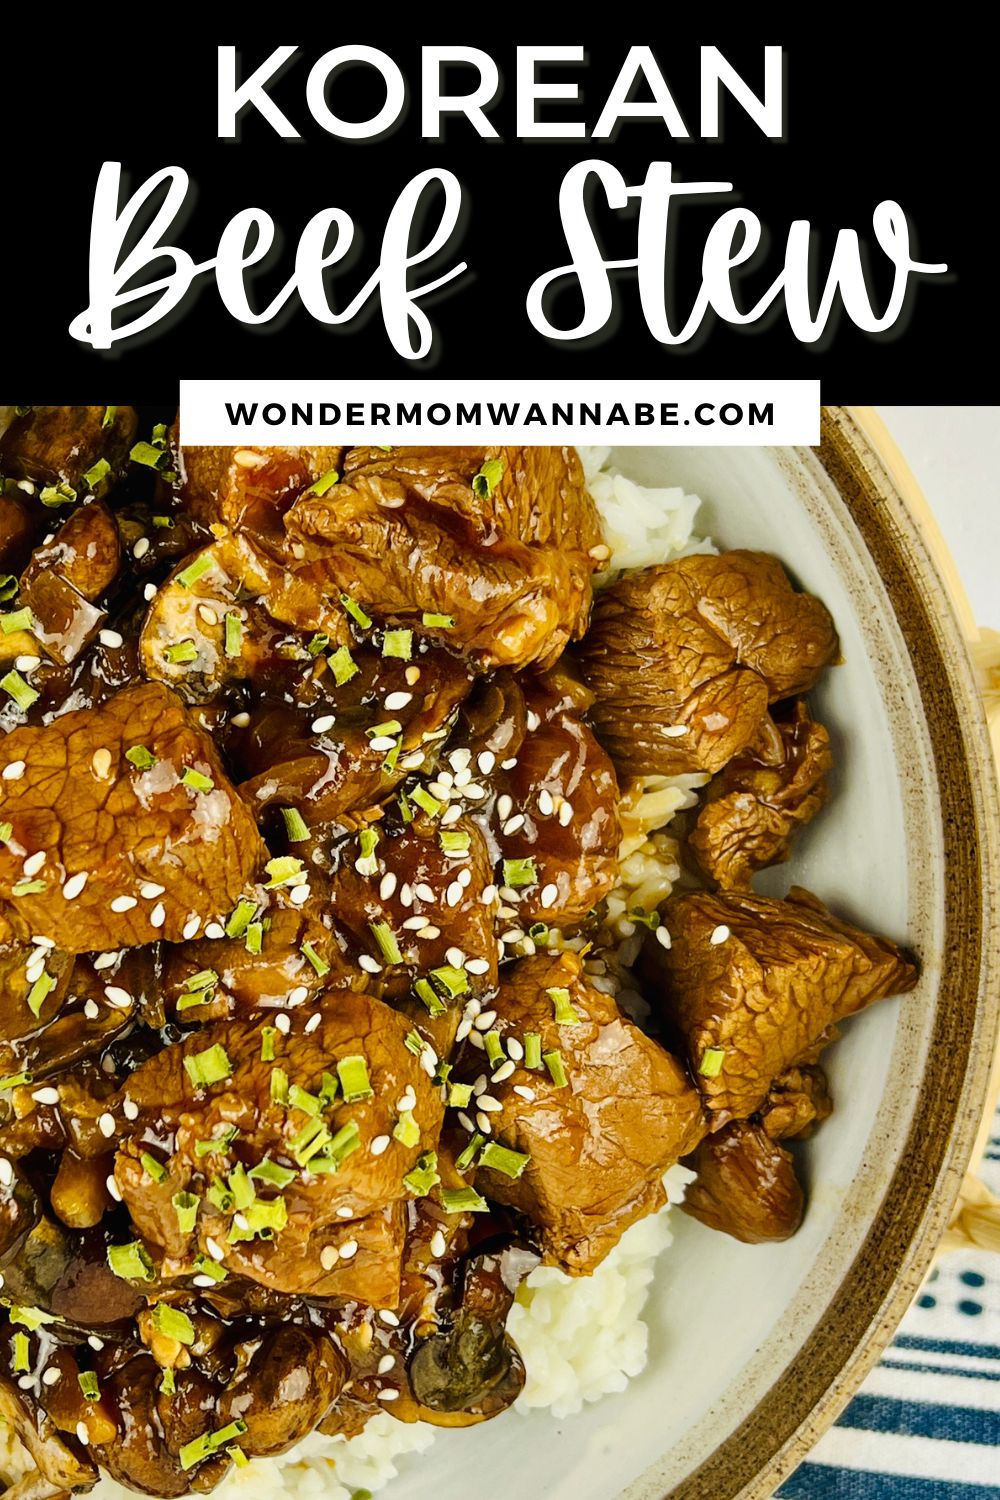 A bowl of Korean beef stew served over rice, topped with sesame seeds and garnished with green herbs, from wondermomwannabe.com.